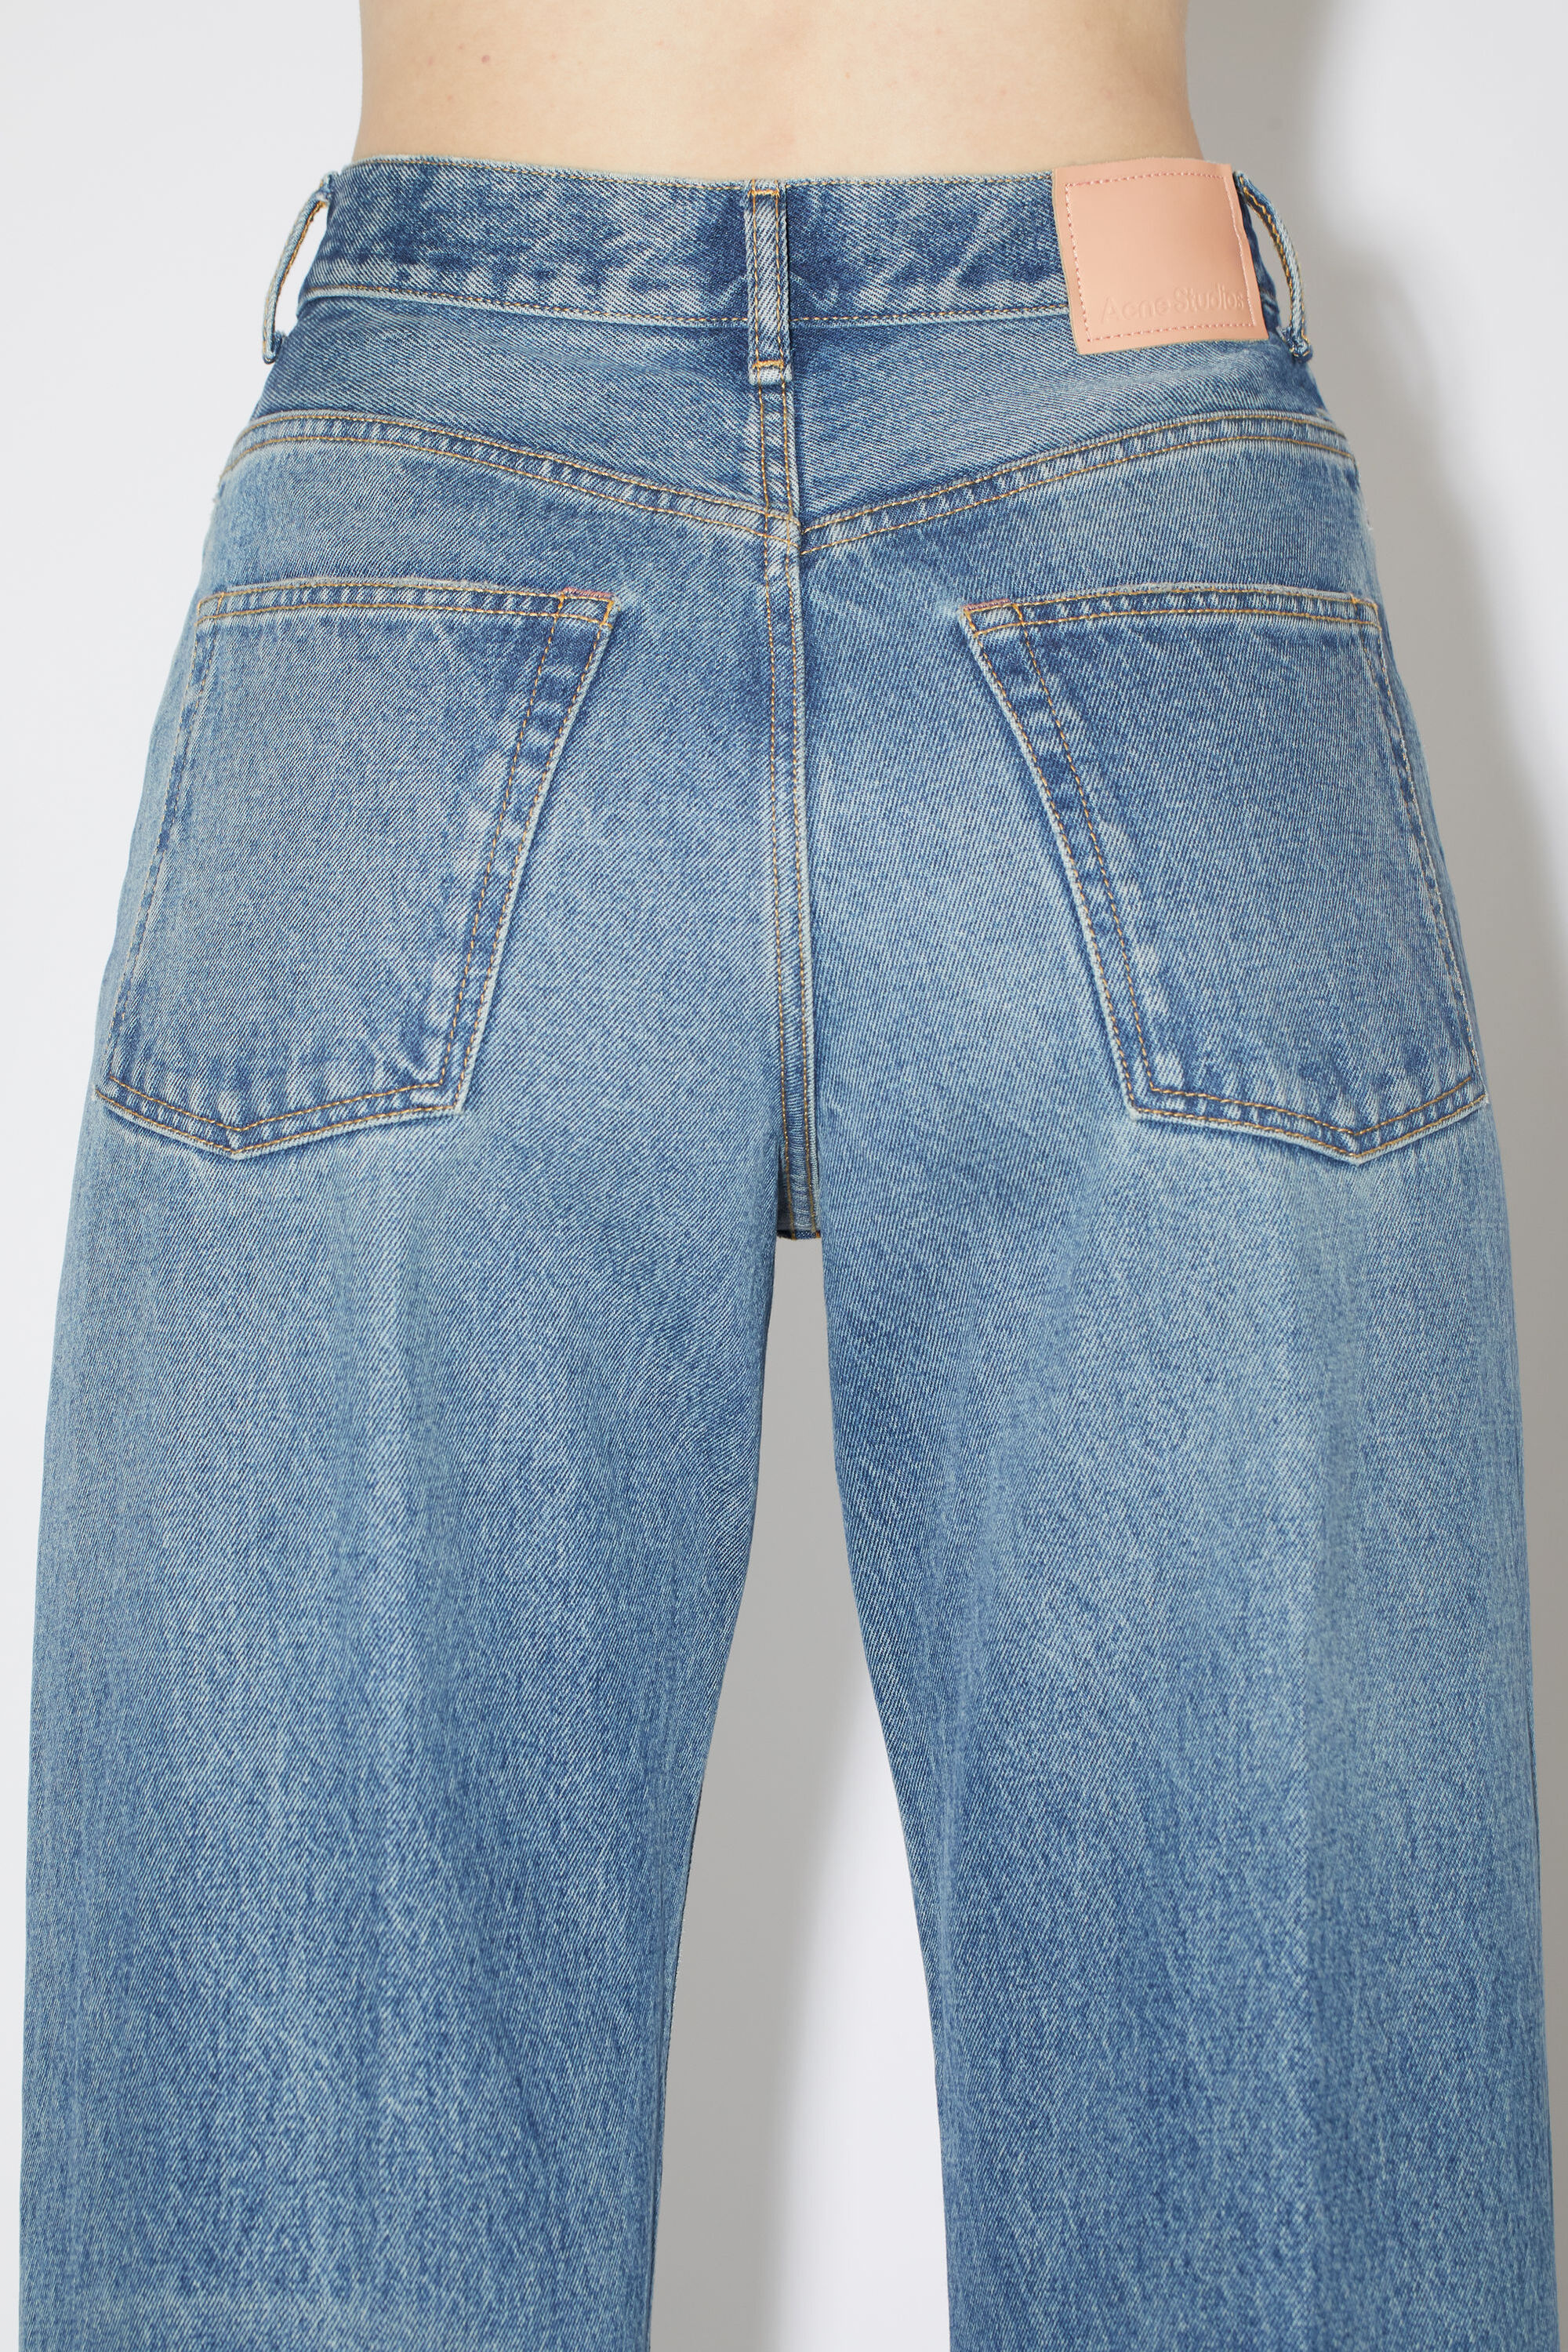 Acne Studios - Relaxed fit jeans - 2022F - Mid blue